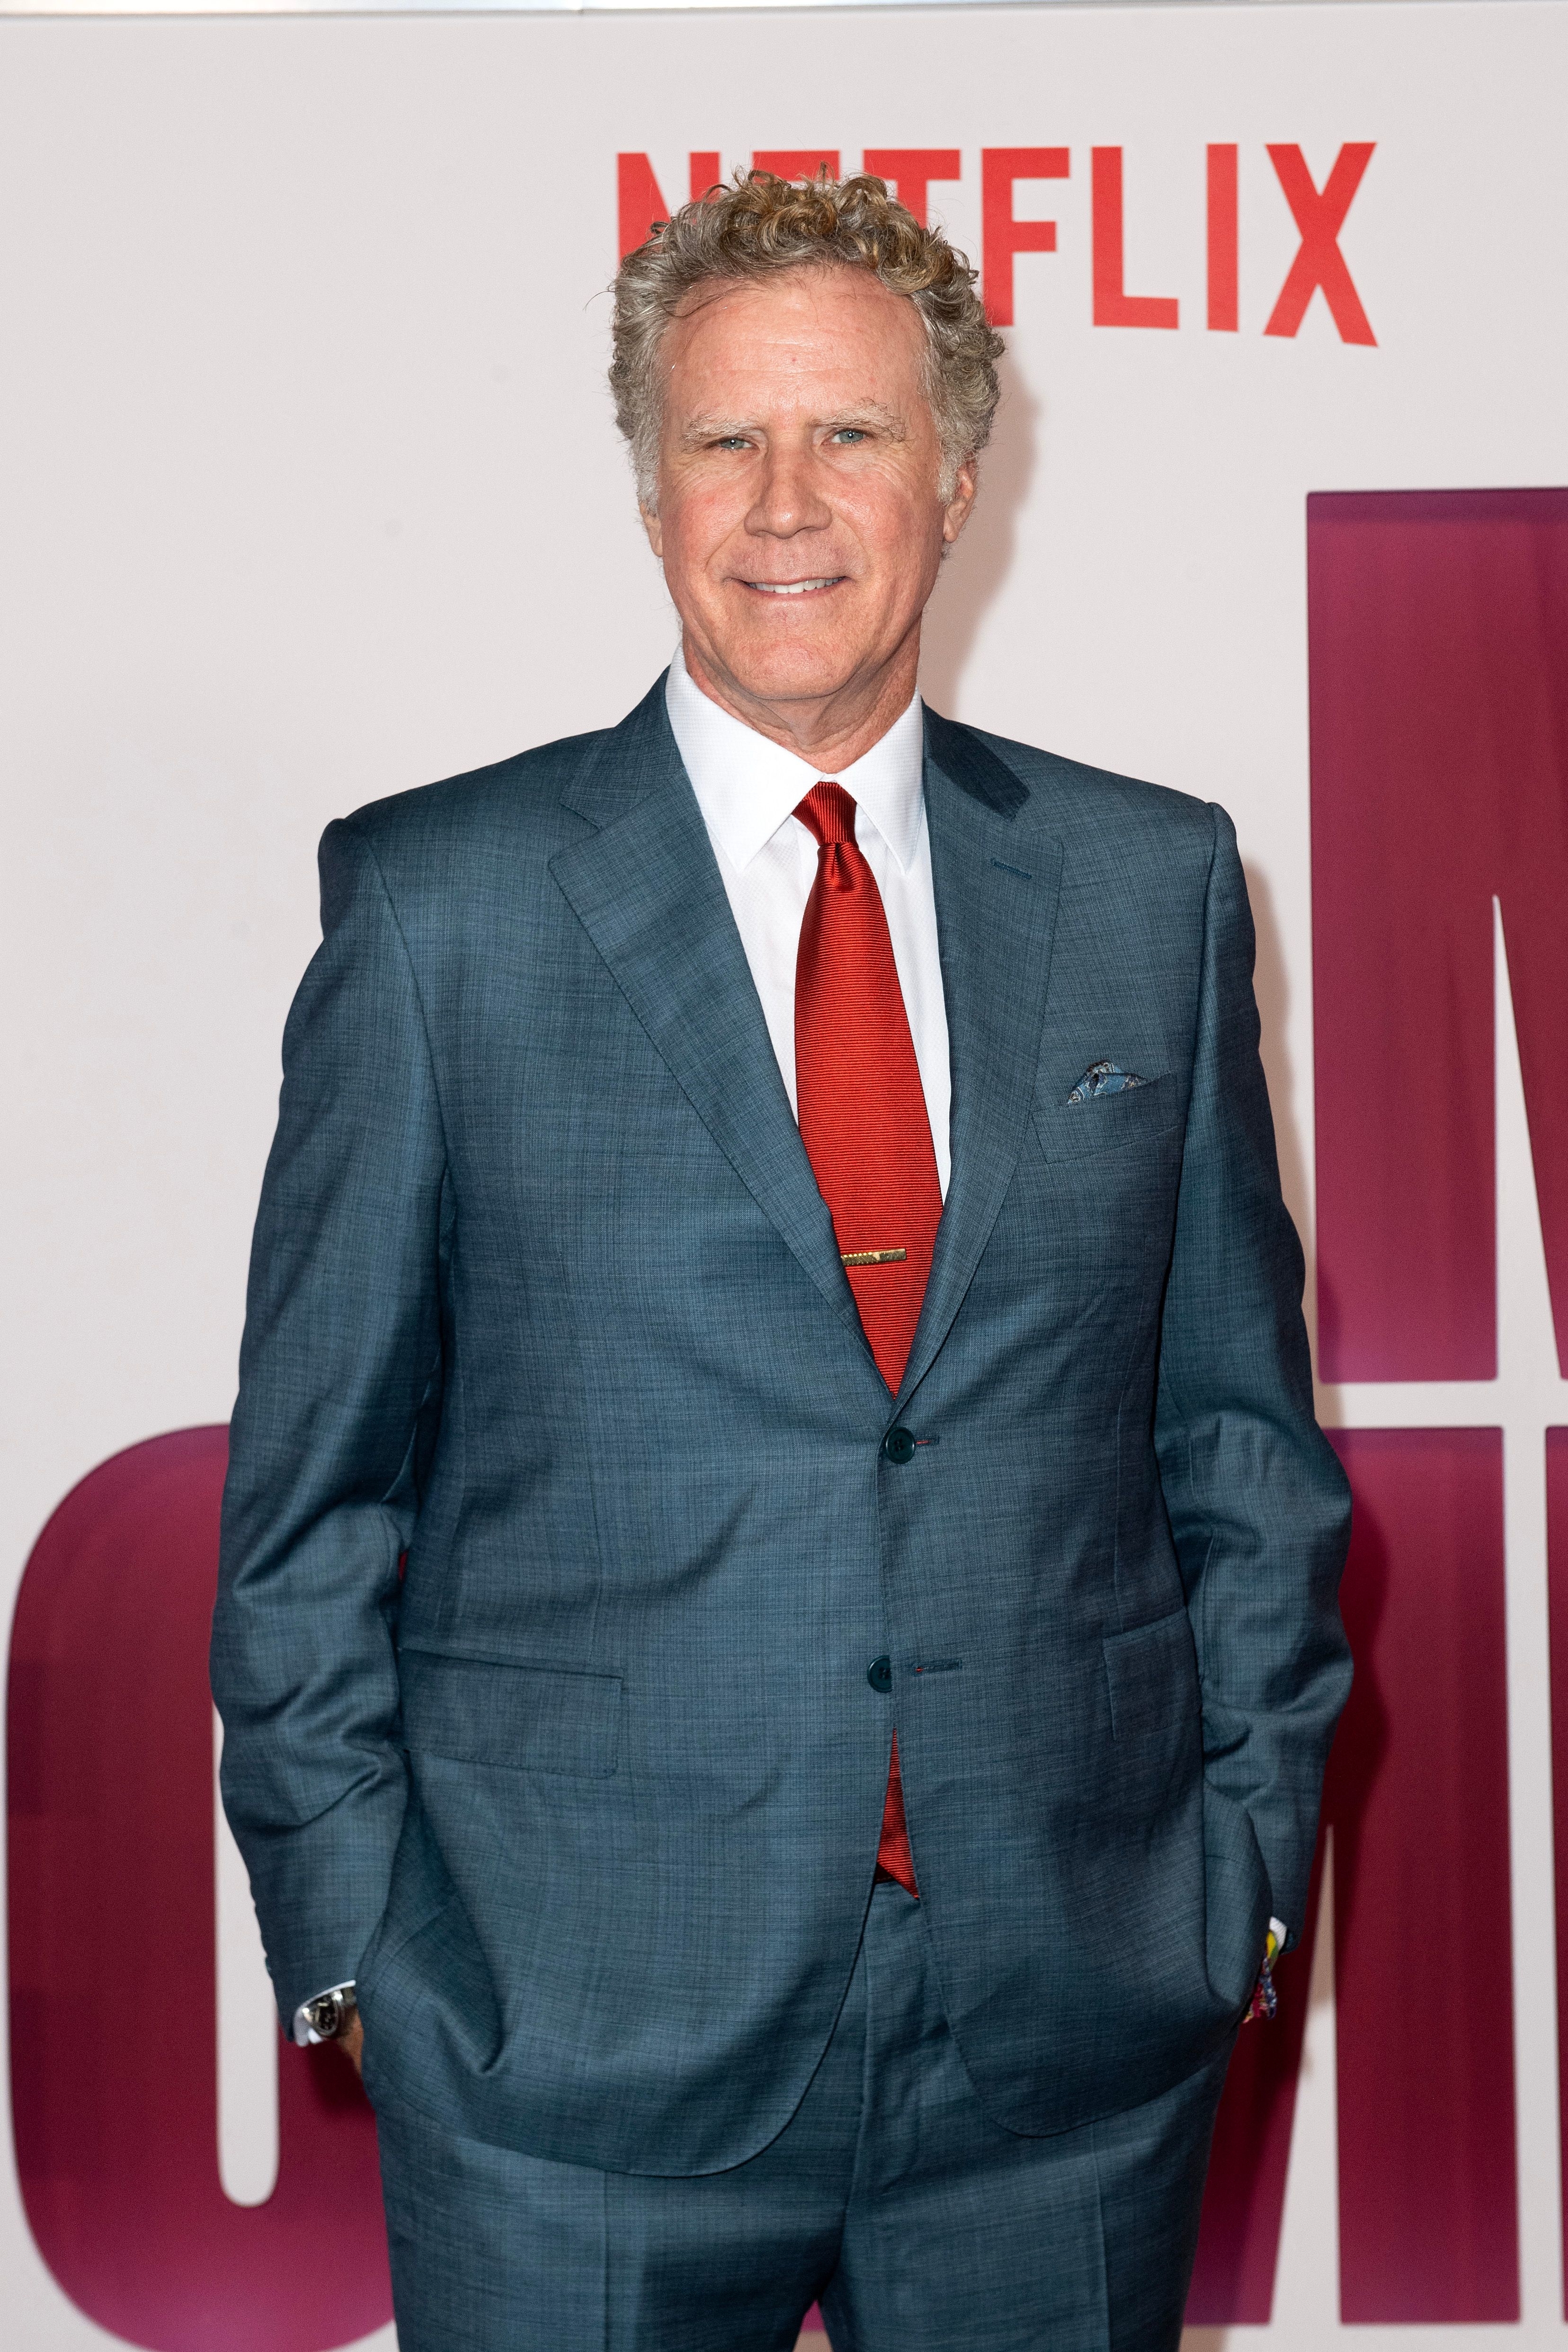 Will in gray suit and red tie standing against a backdrop with Netflix logo